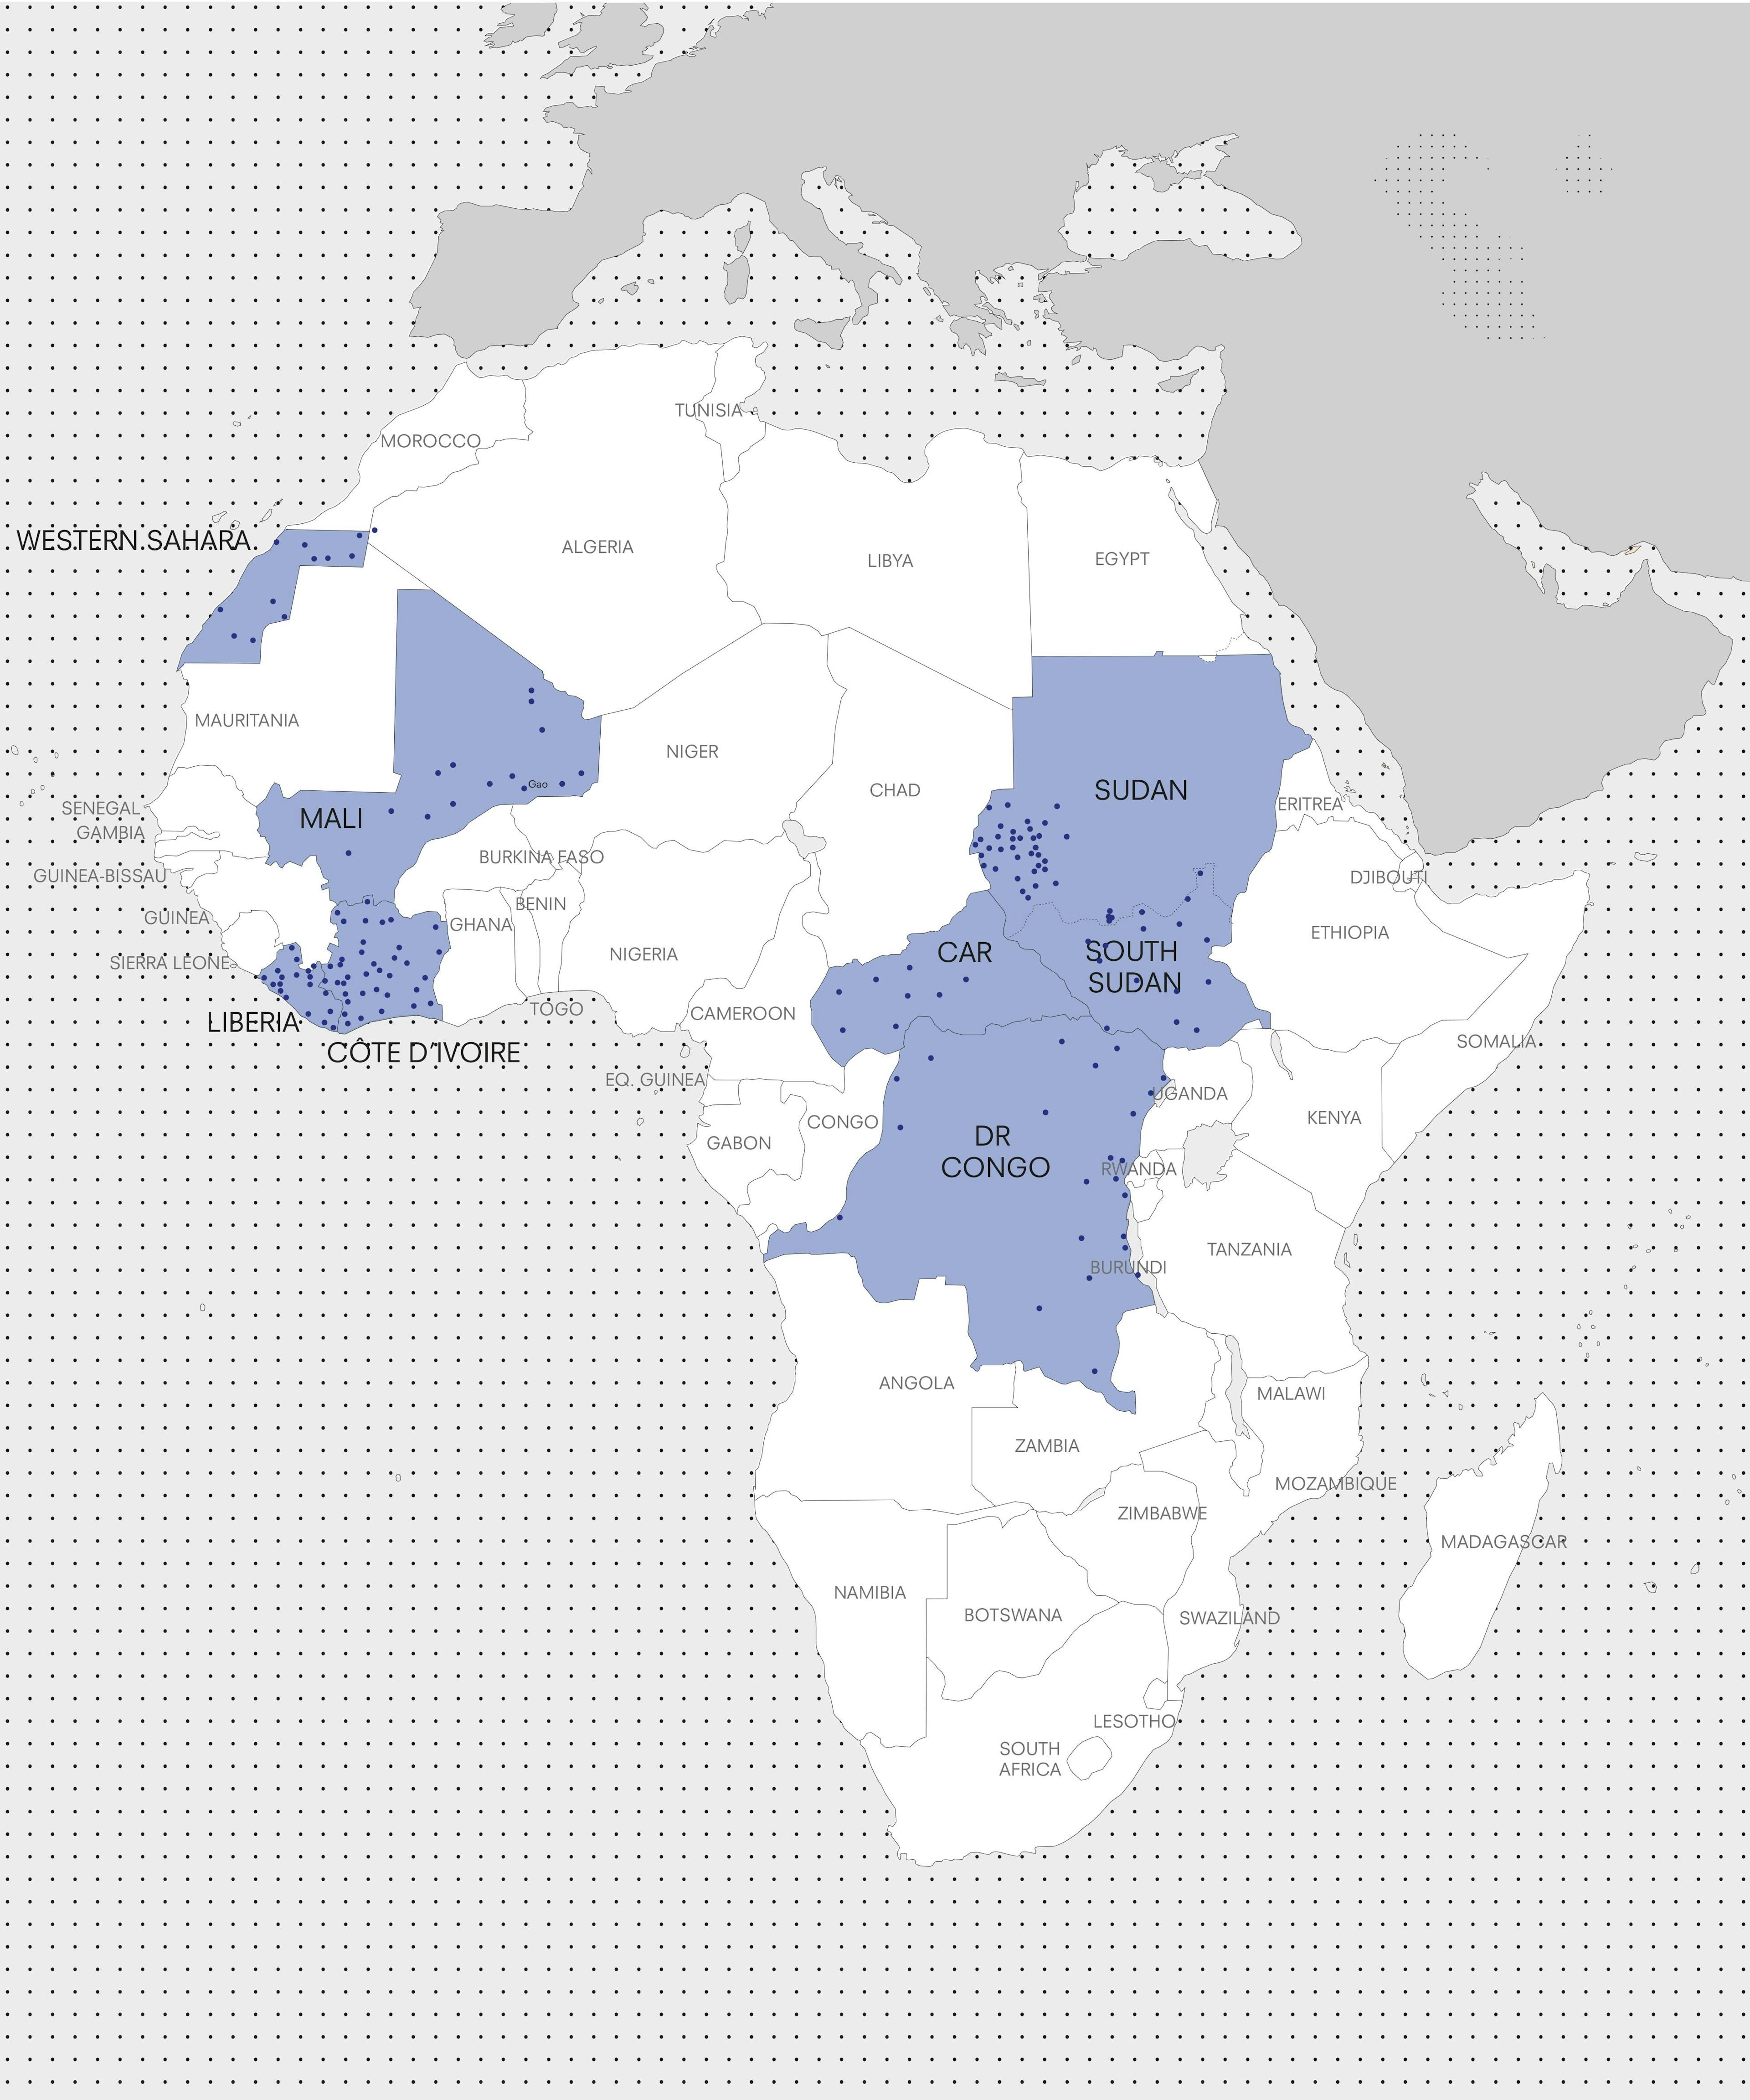 Cities with UN Peacekeeping bases in Afrika 